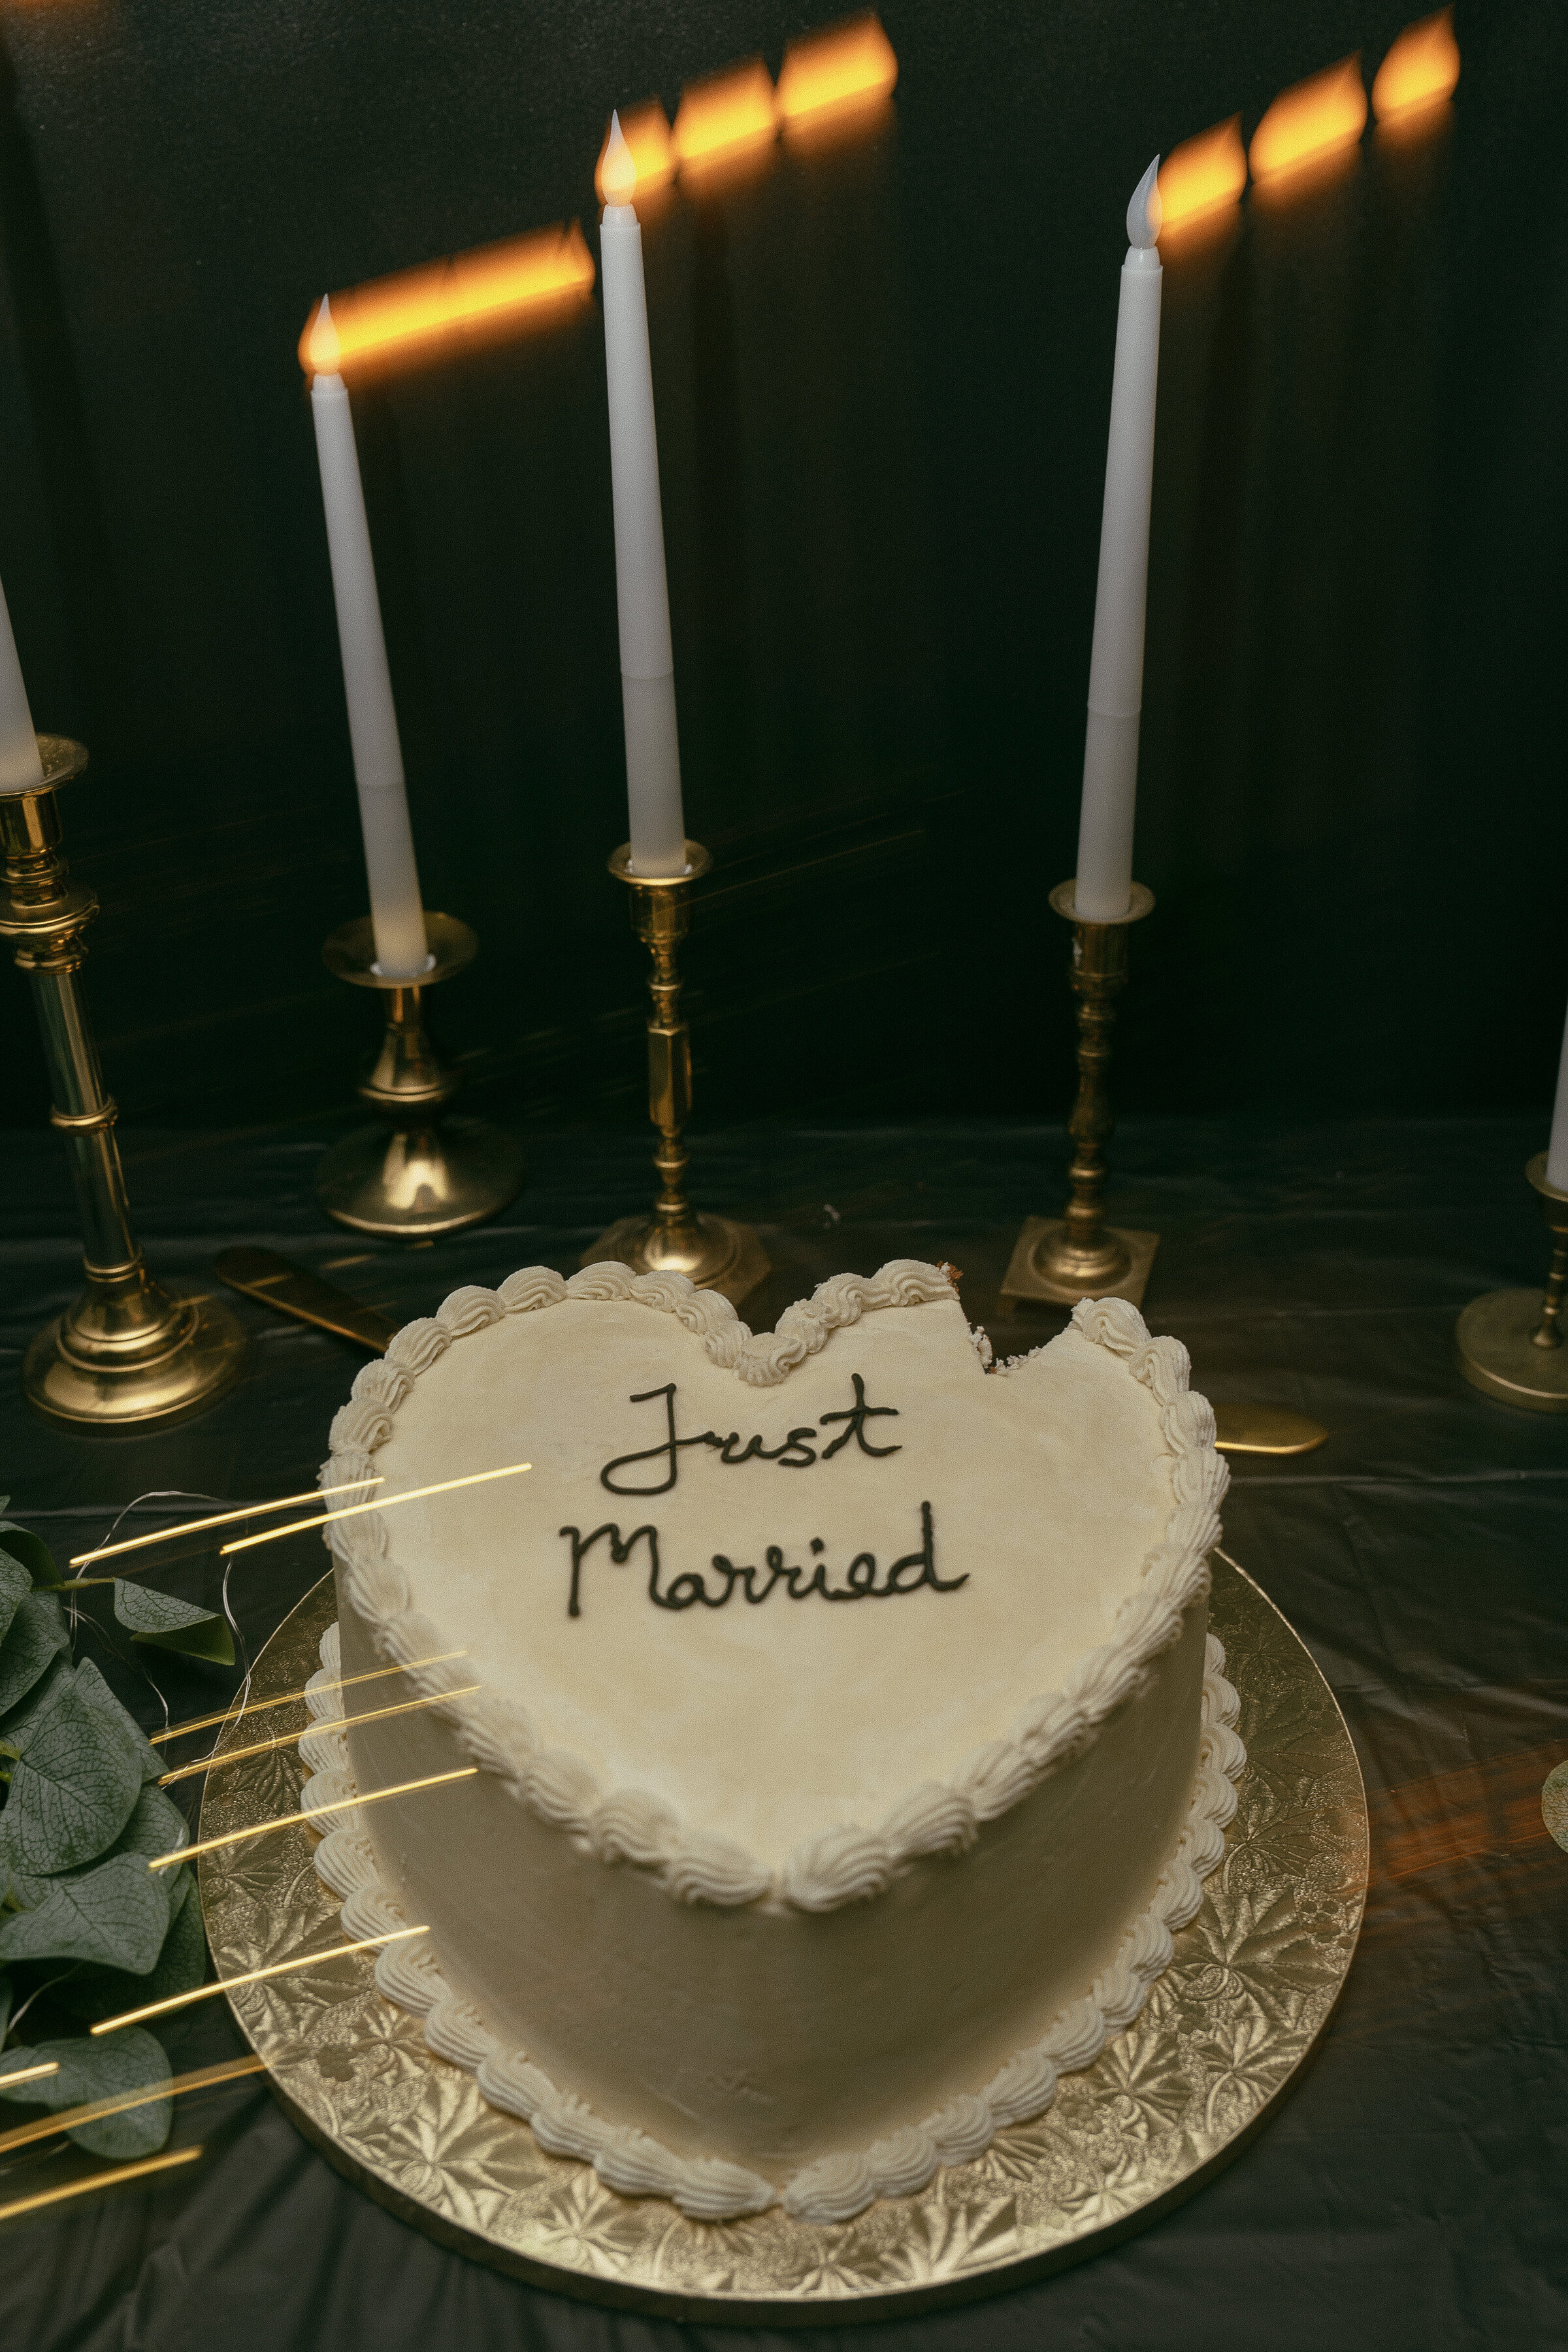 Wedding cake with "Just Married" on top and candles in the background.